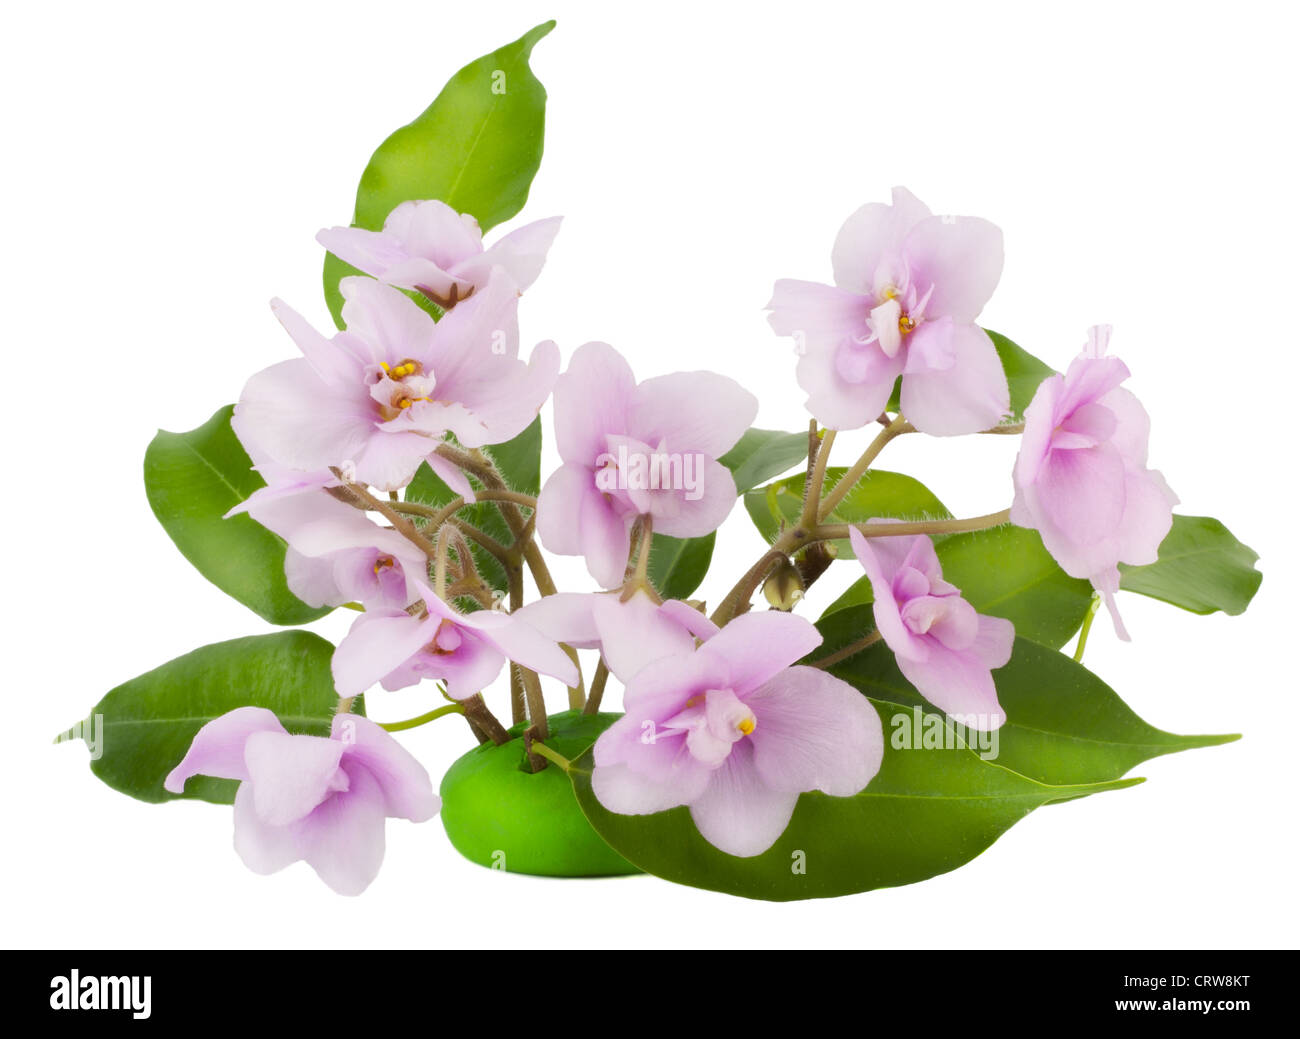 Gentle pink violets flowers Stock Photo